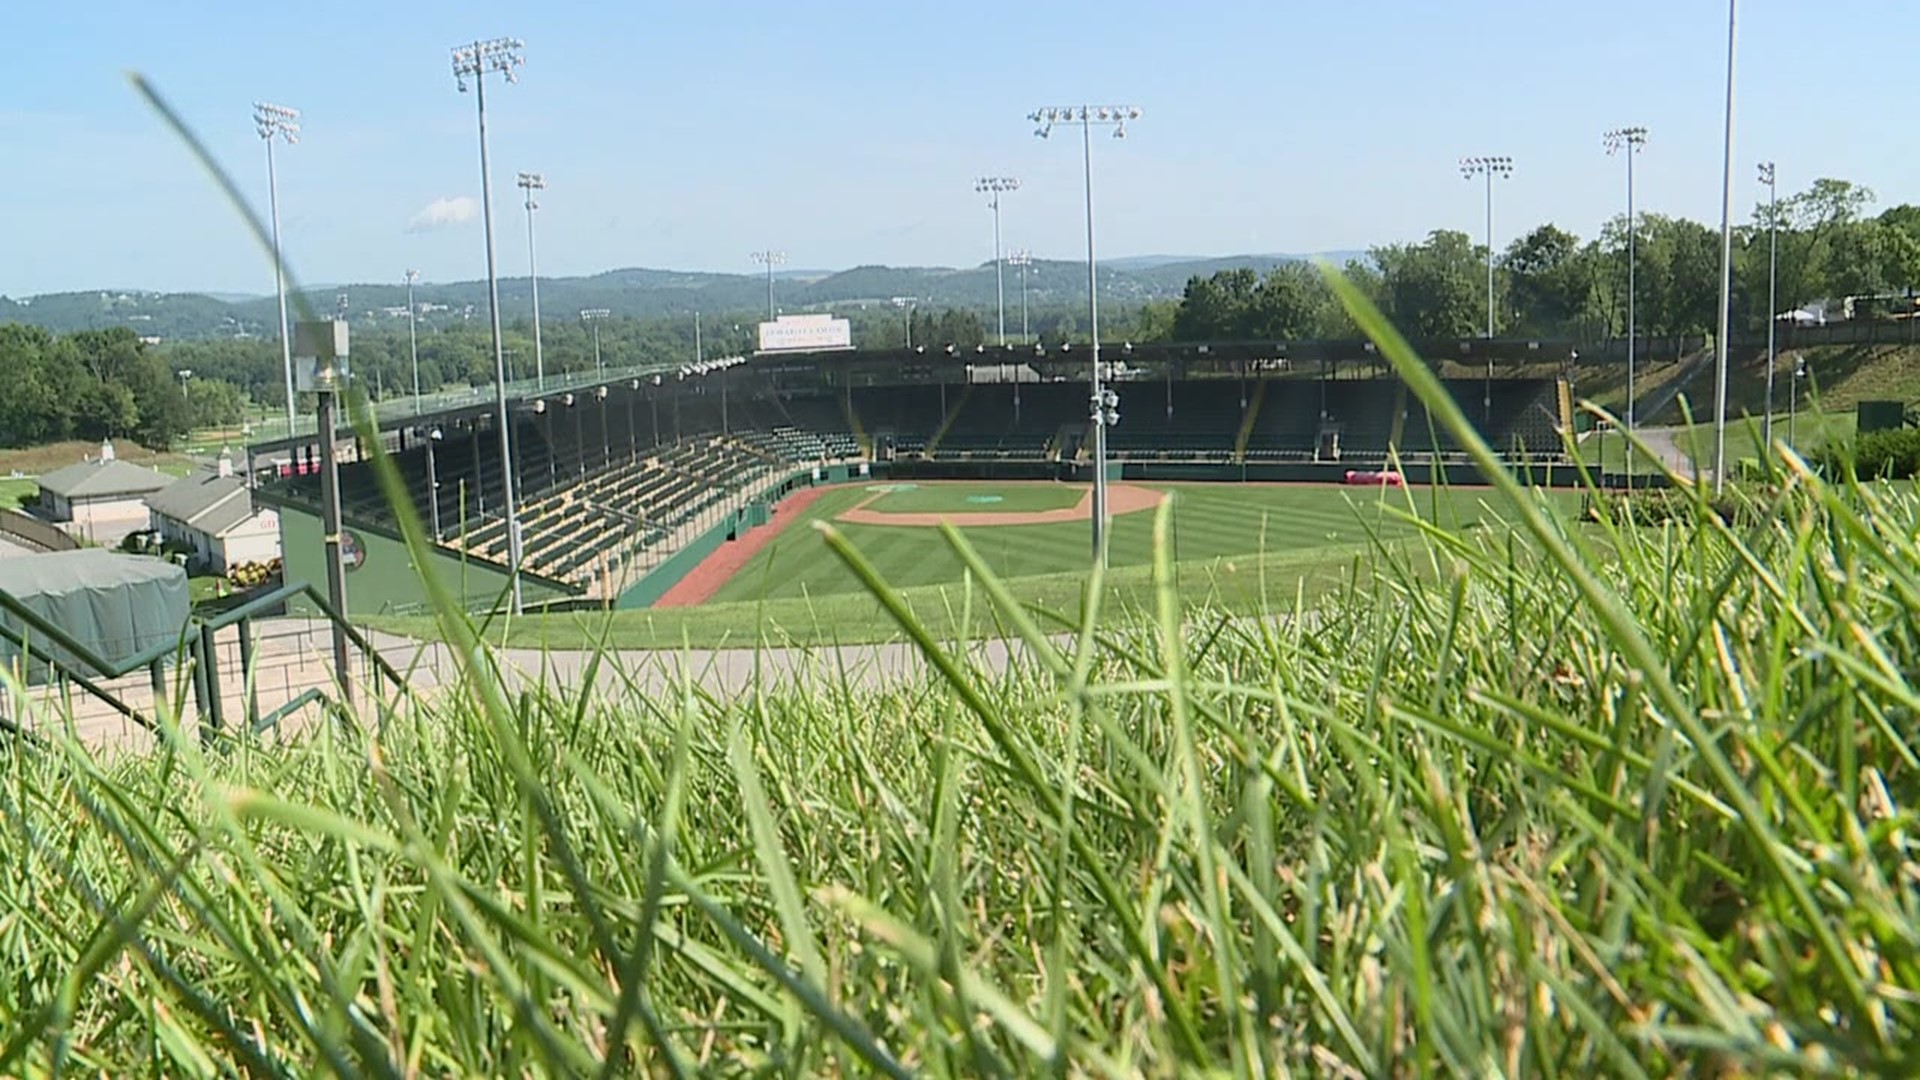 Little League International announced Friday that fans will no longer be allowed to watch the Little League World Series in person, leaving local spectators out.